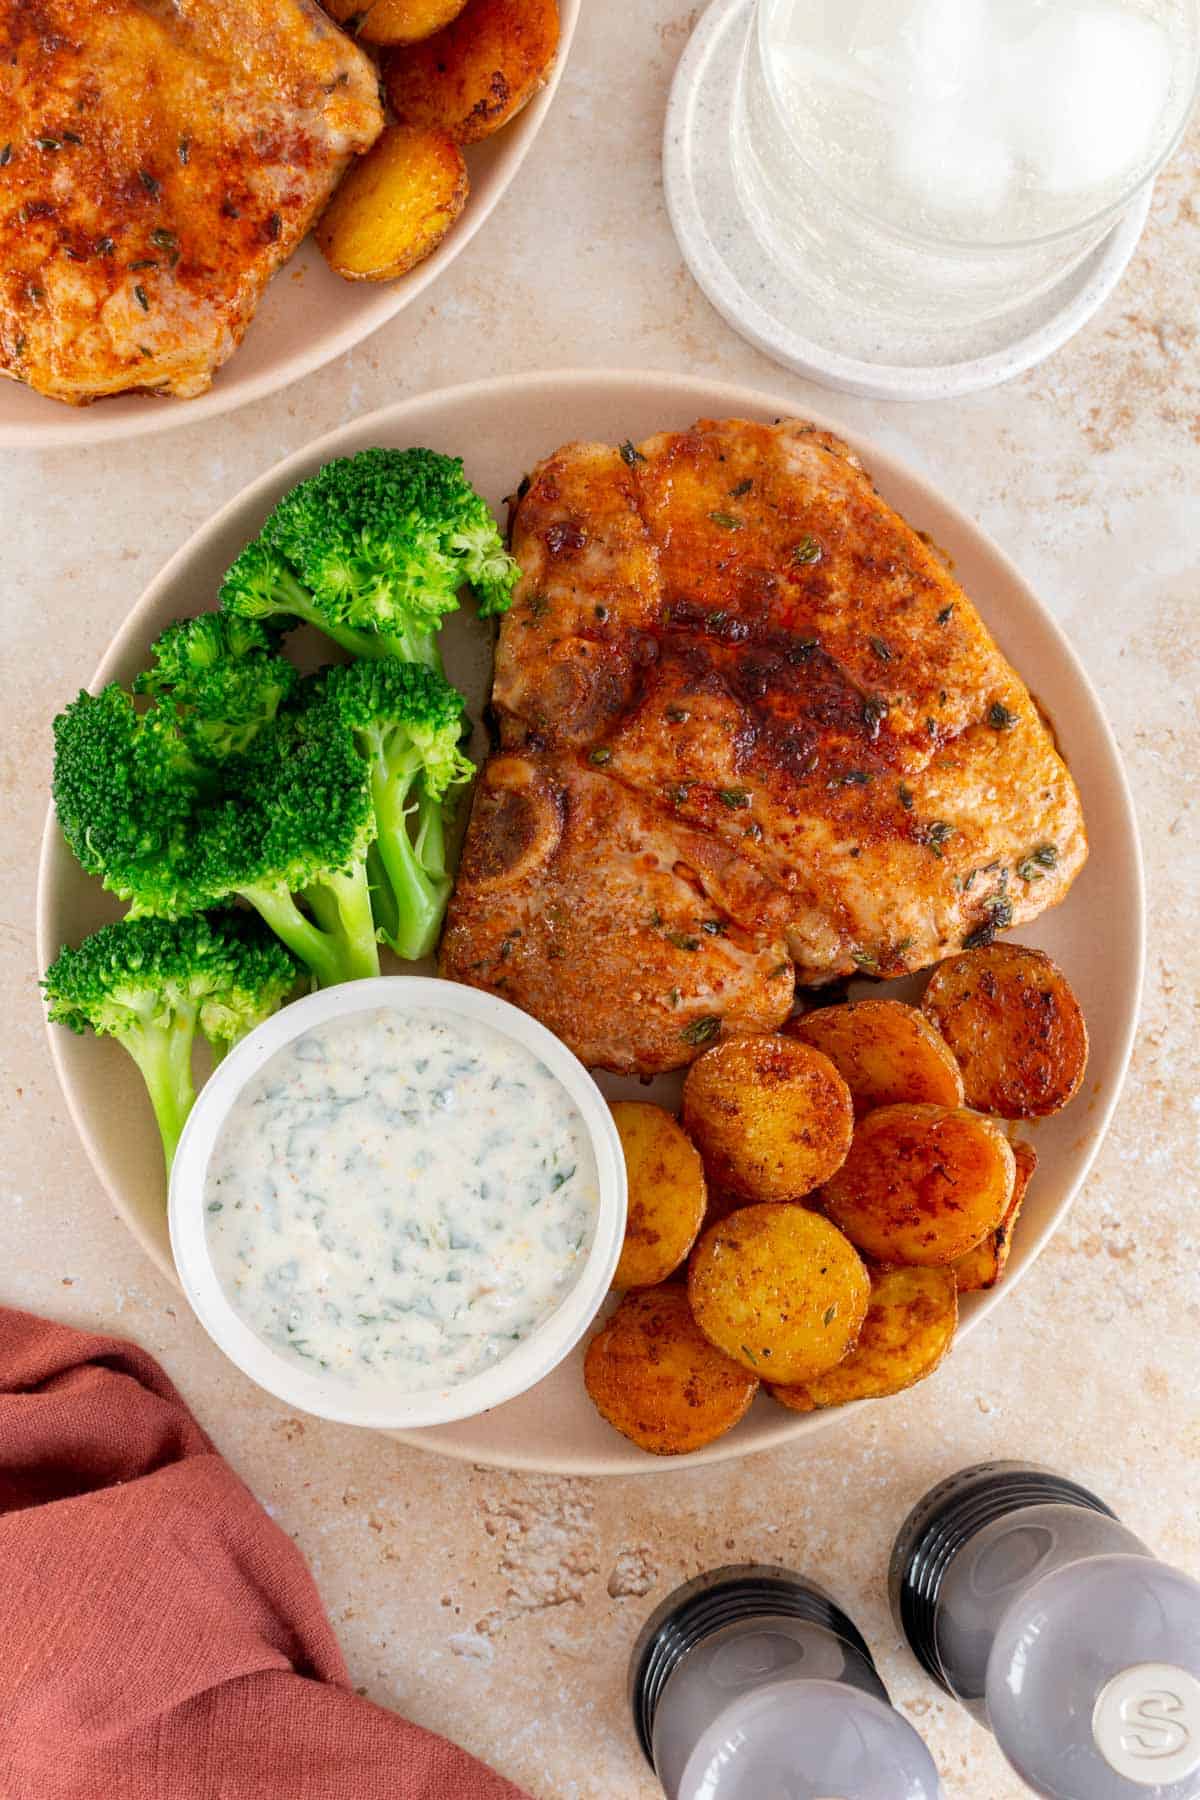 A close up view of a plate with an oven baked bone-in pork chop with potatoes, broccoli, and a bowl of herby sauce.